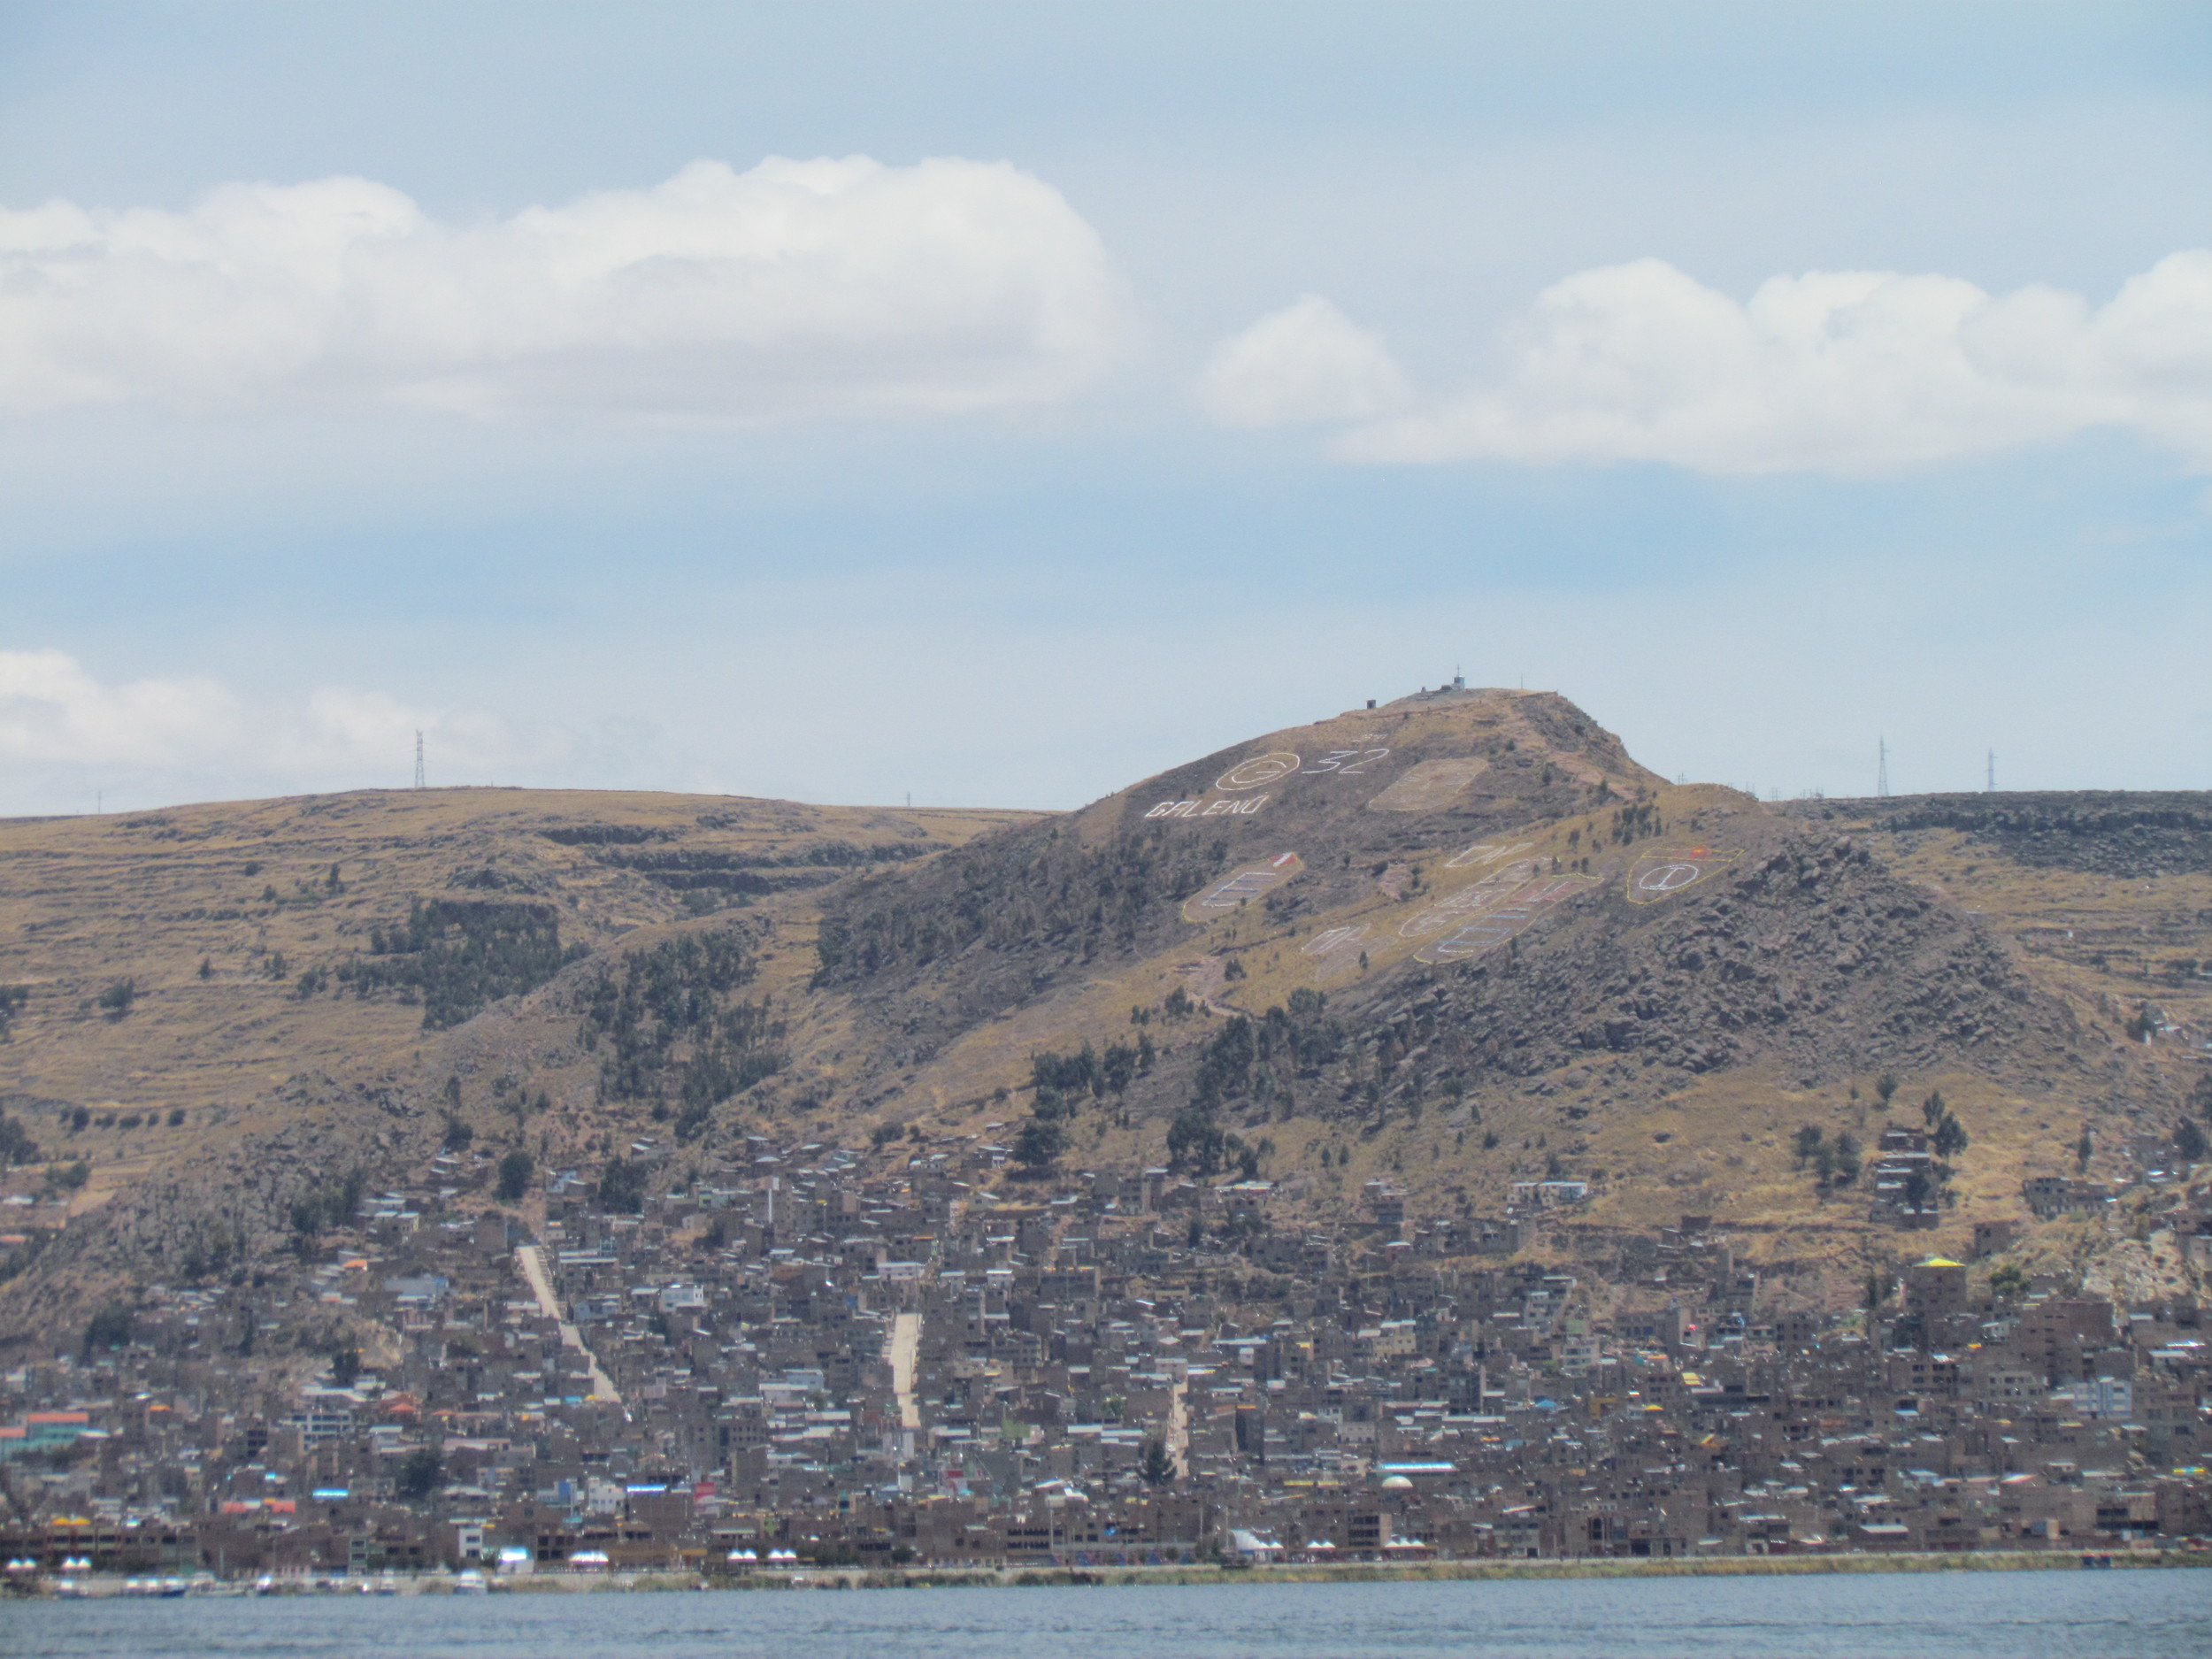 We got a good look of Puno on our way back